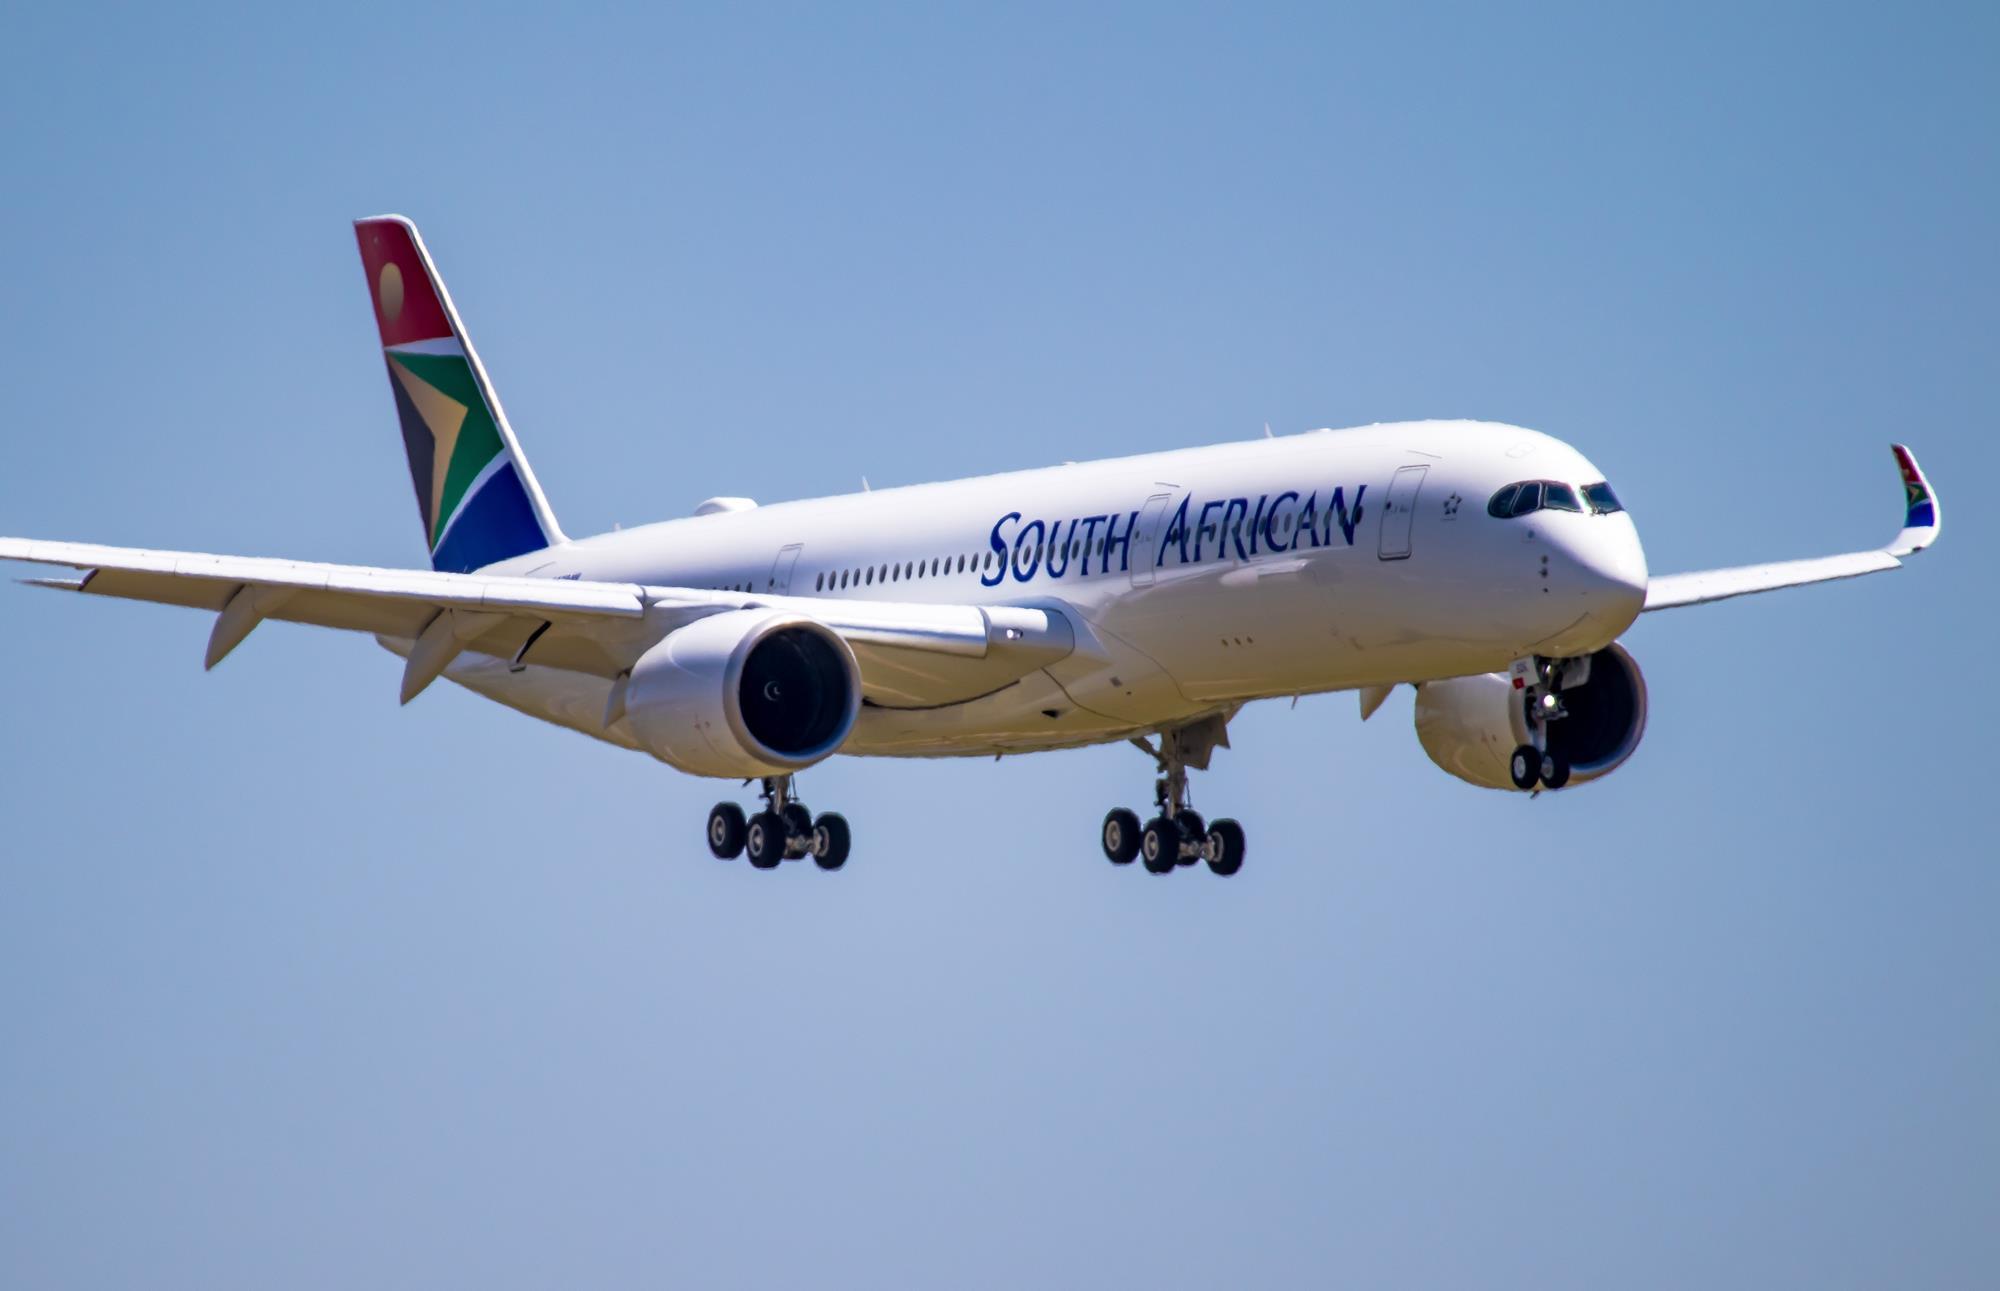 Johannesburg to Lagos flights on South African Airways now.